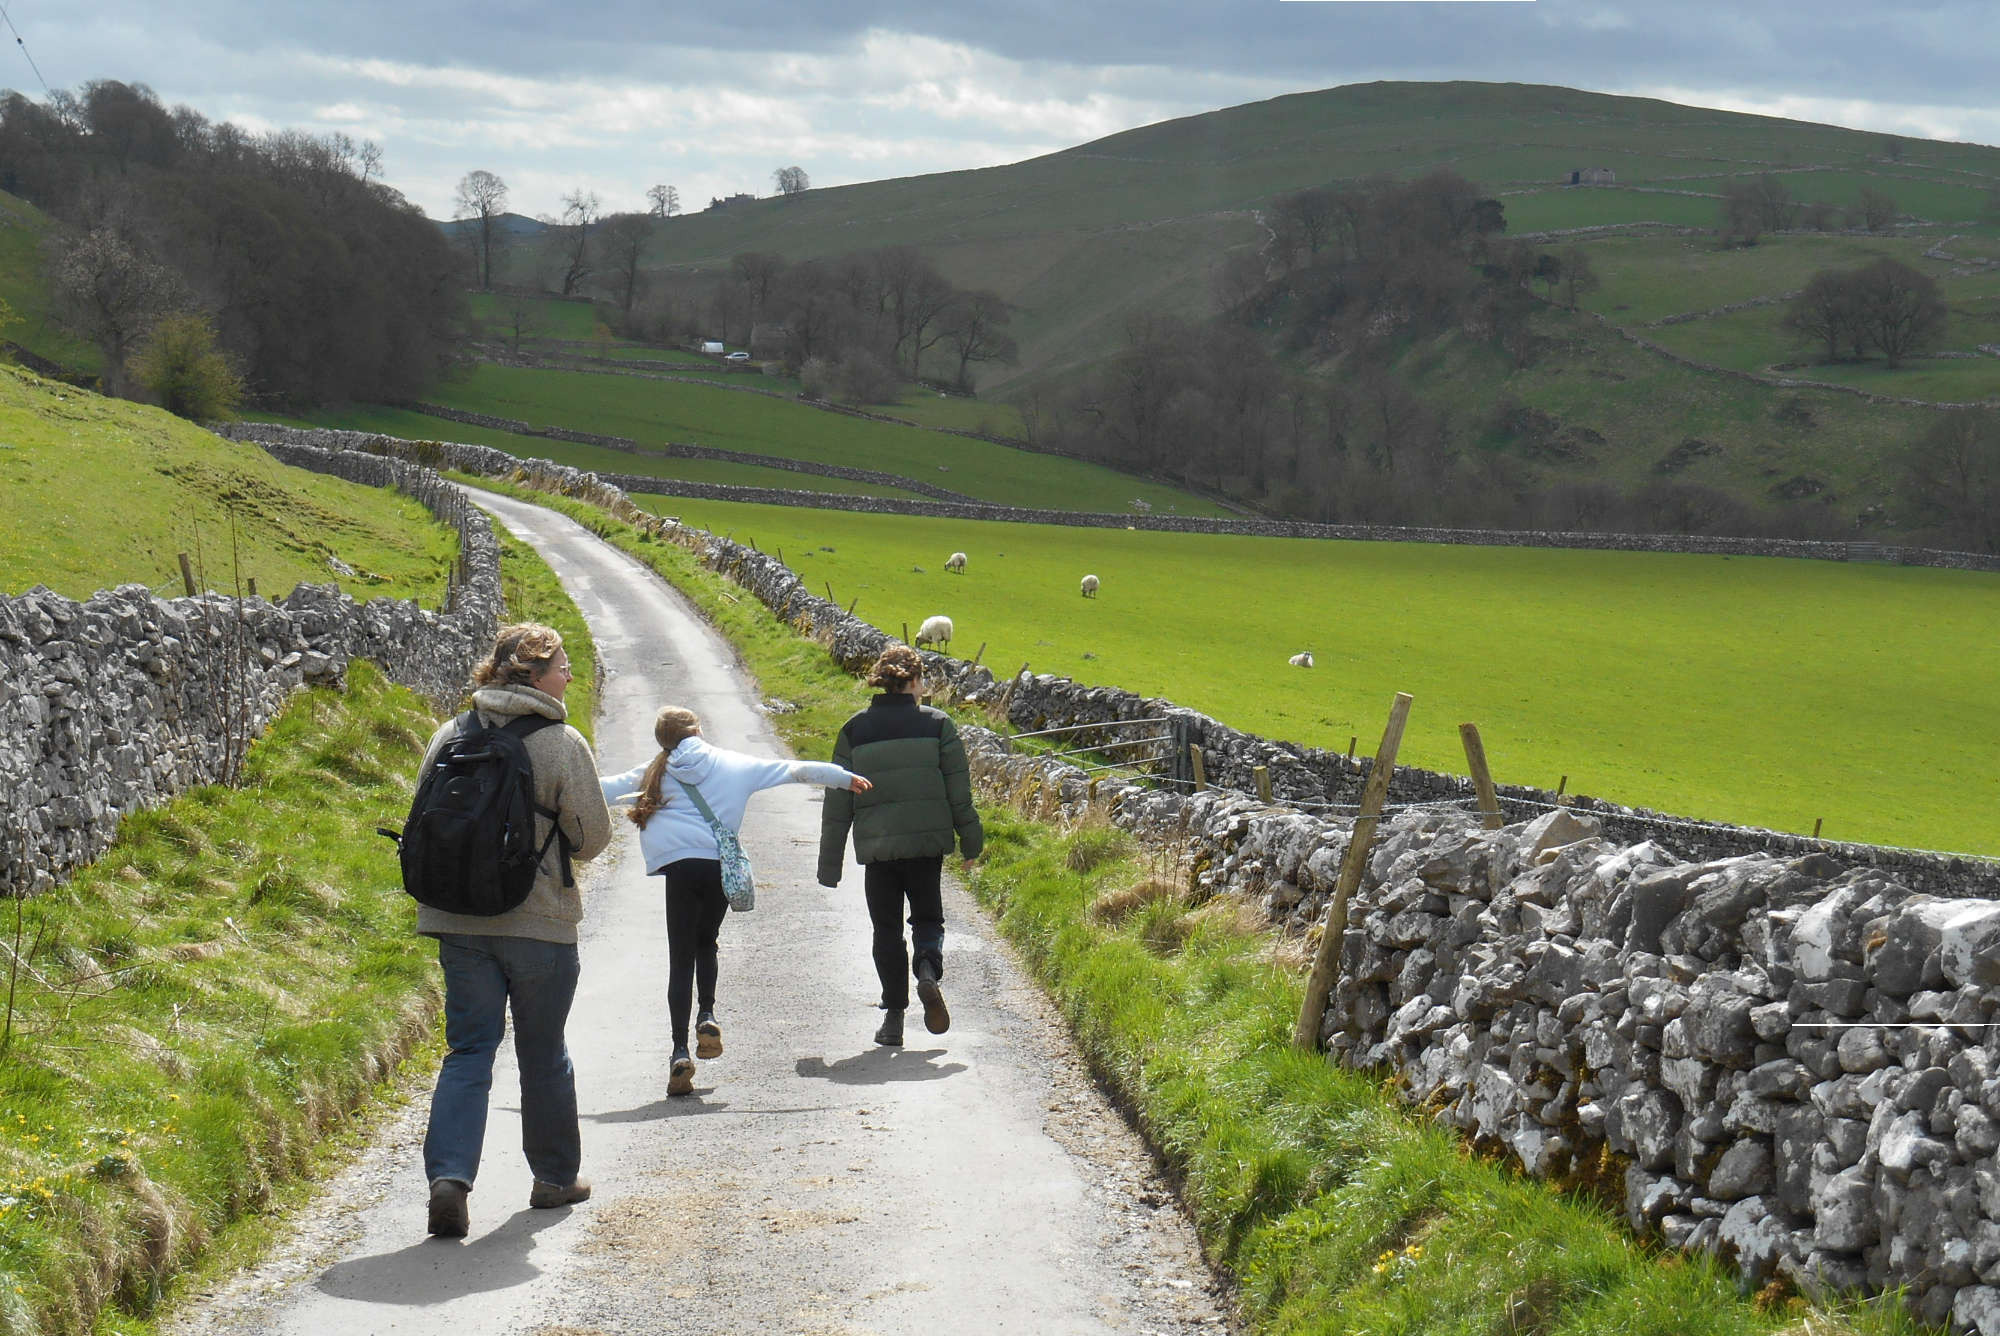 Jenny Lunnon's family wandering through the peak district countryside